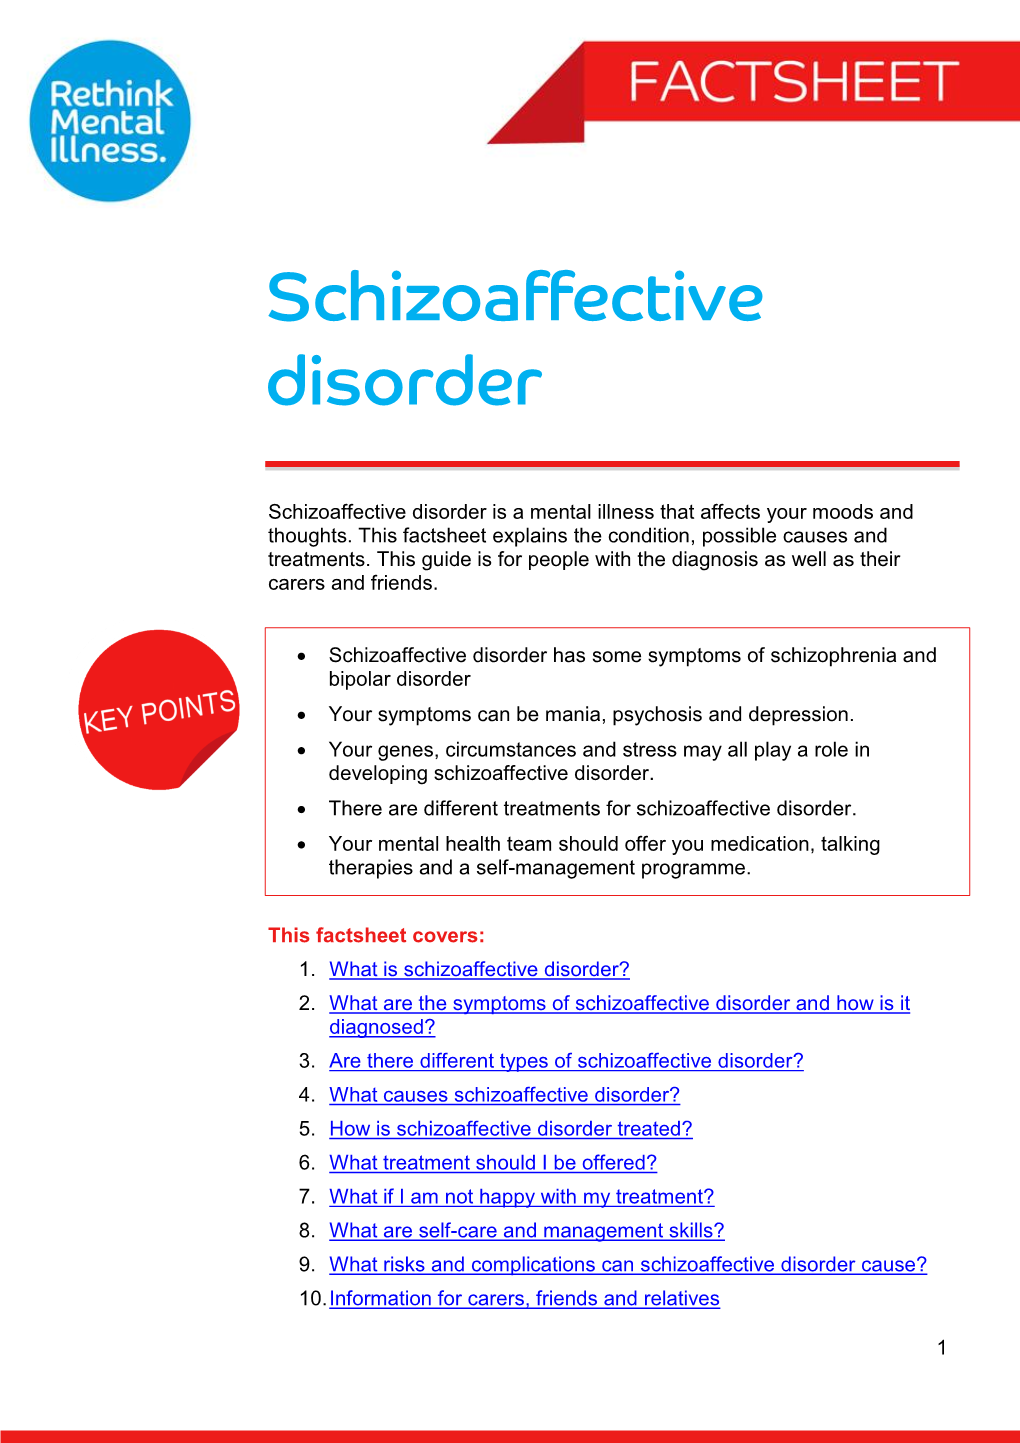 Schizoaffective Disorder Is a Mental Illness That Affects Your Moods and Thoughts